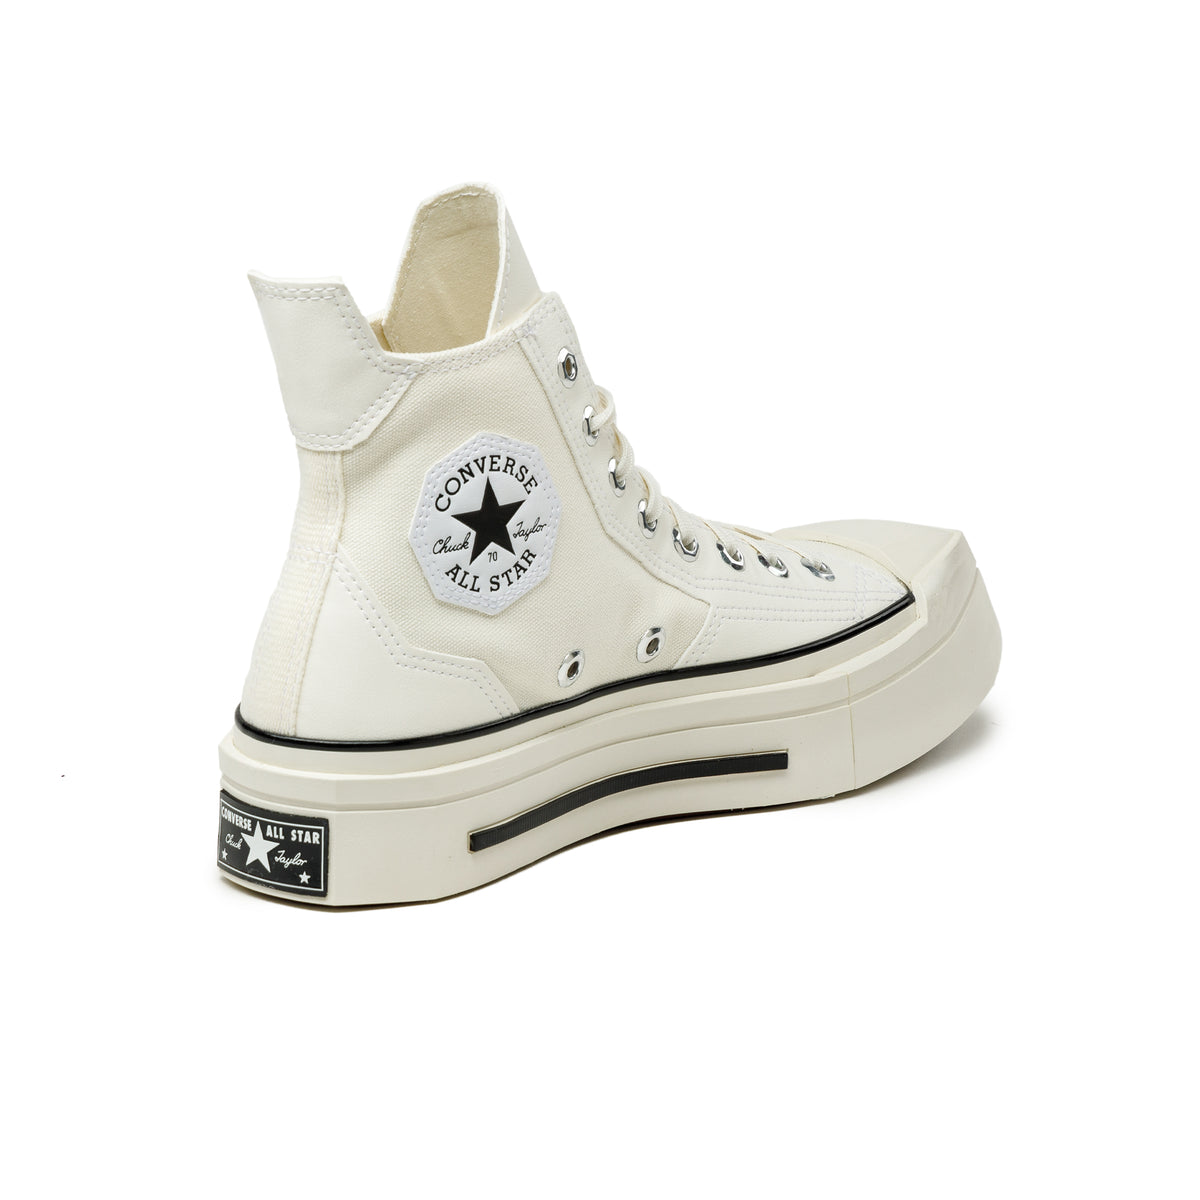 Converse Chuck Taylor All Star '70 De Luxe Squared Hi » Buy online 